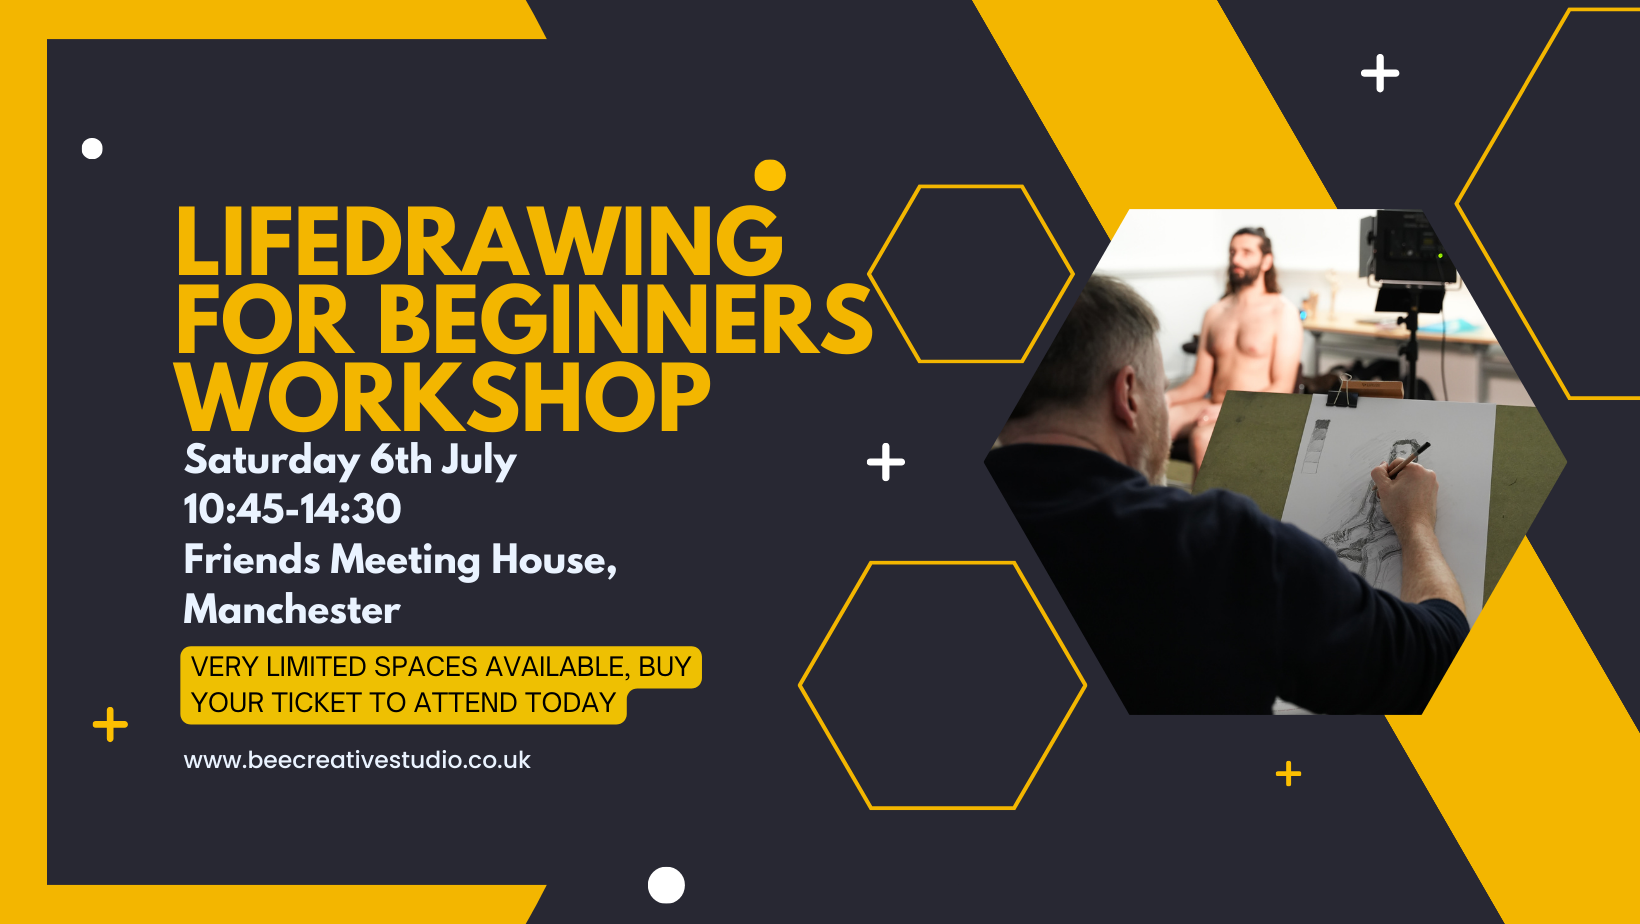 Learn Life Drawing for Beginners Workshop
